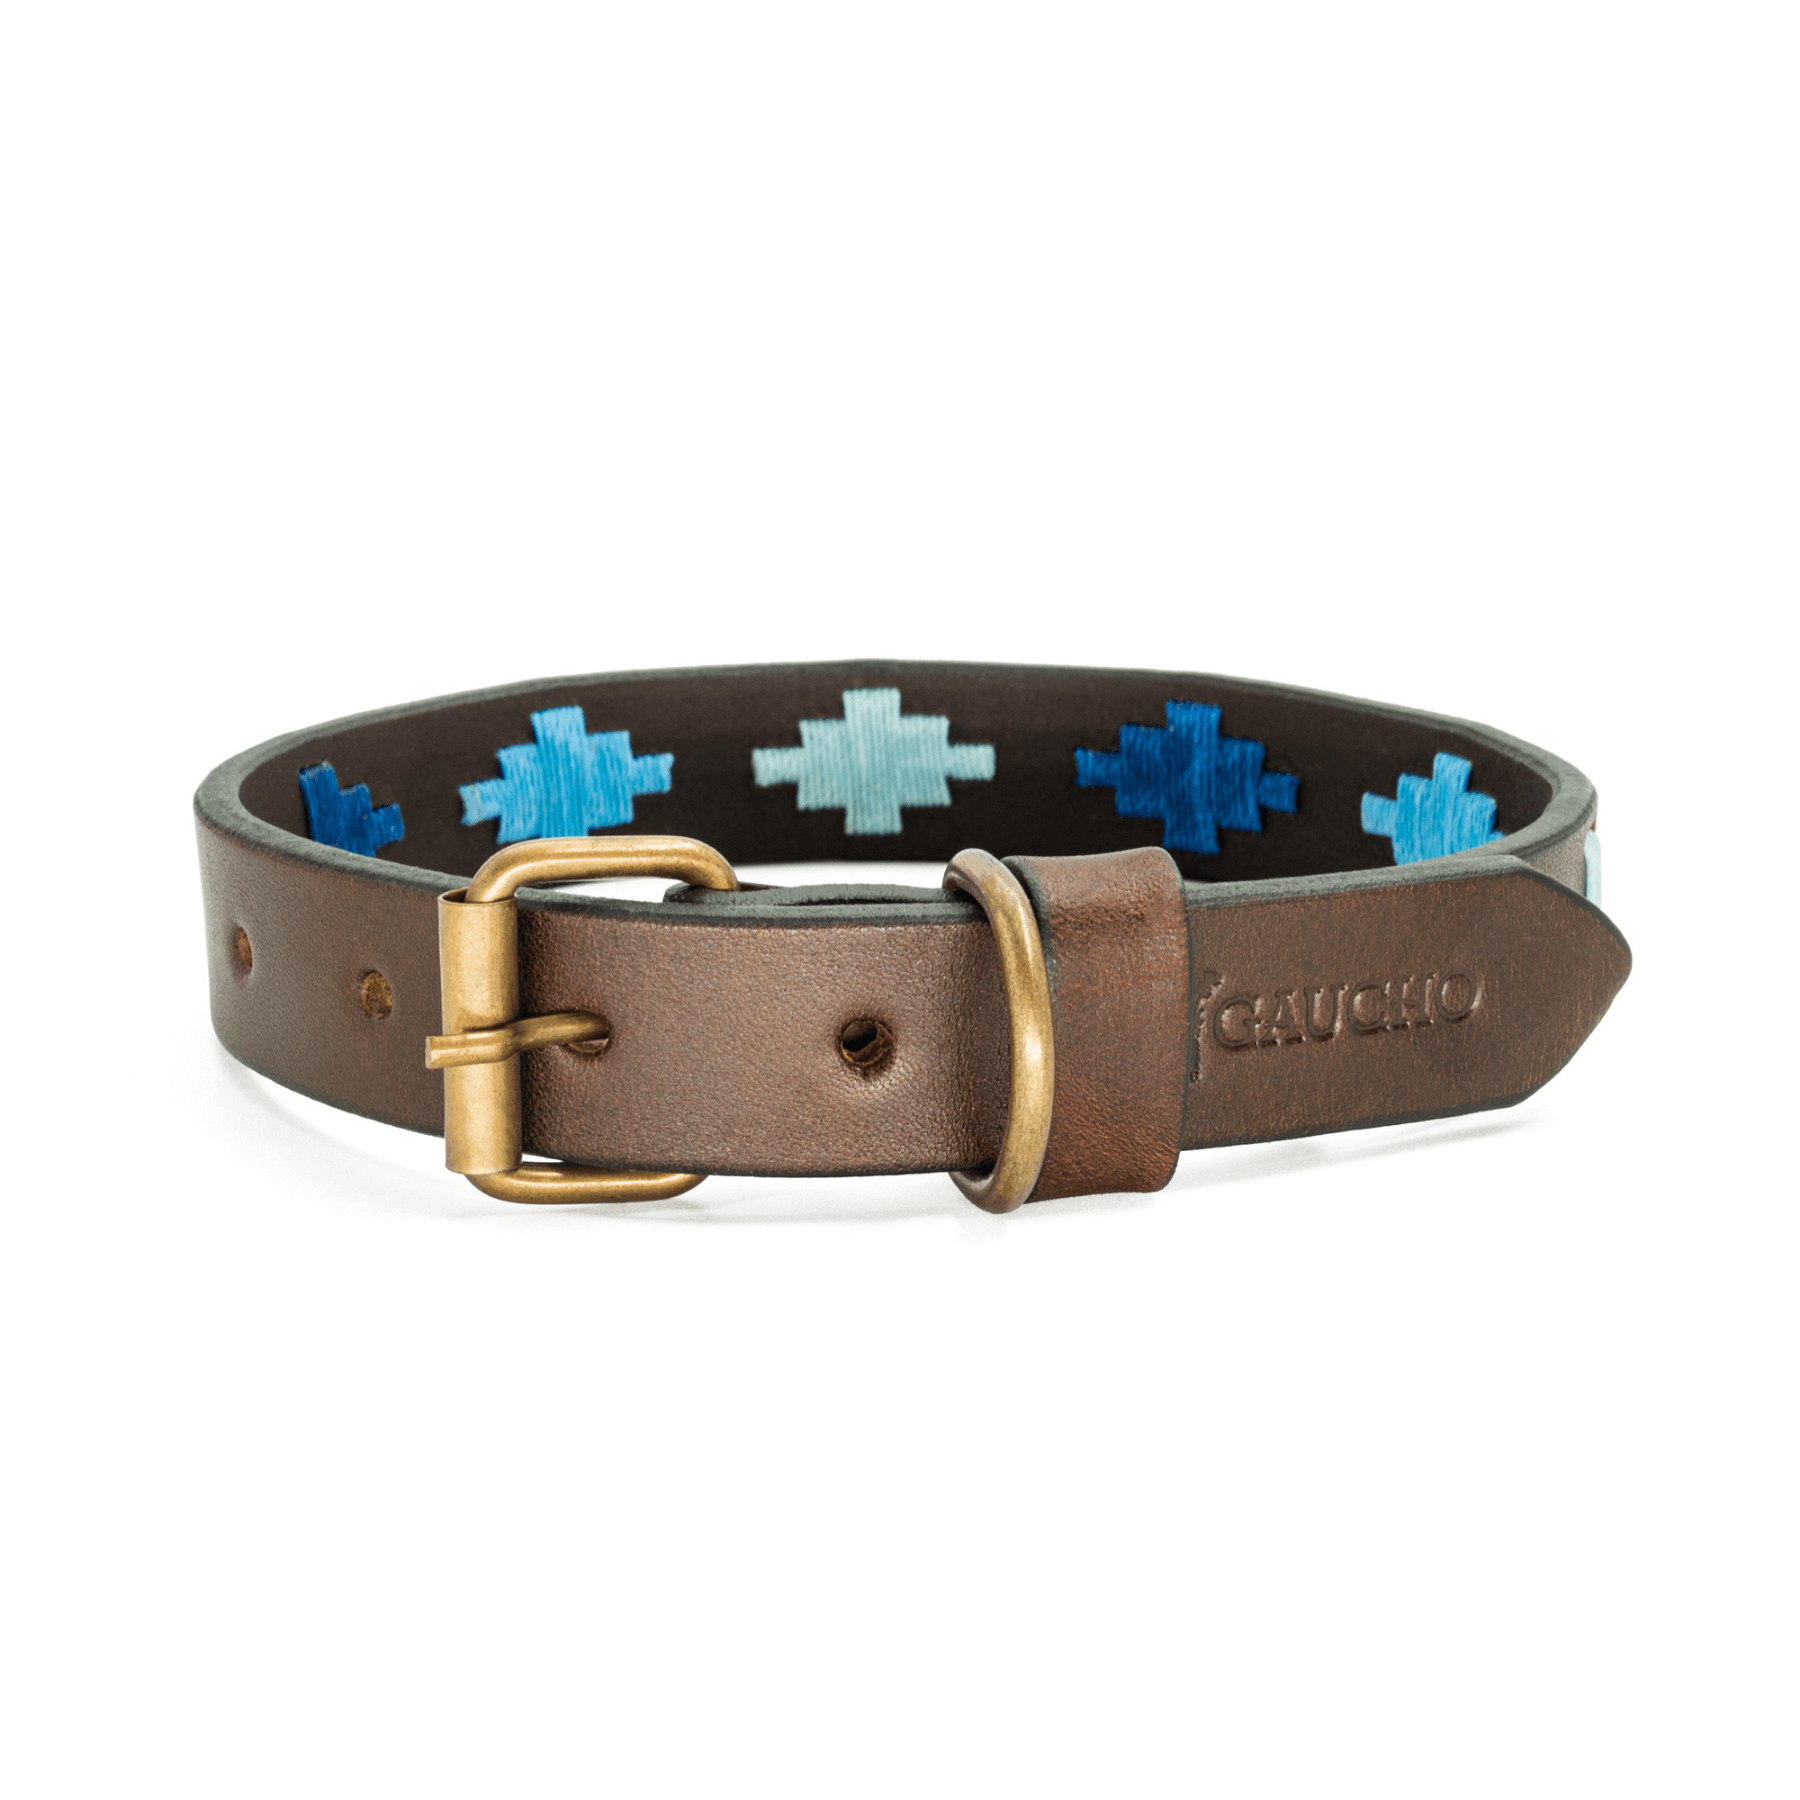 Gaucholife Dogs Embroidered Leather Dog Collar (Ombu)